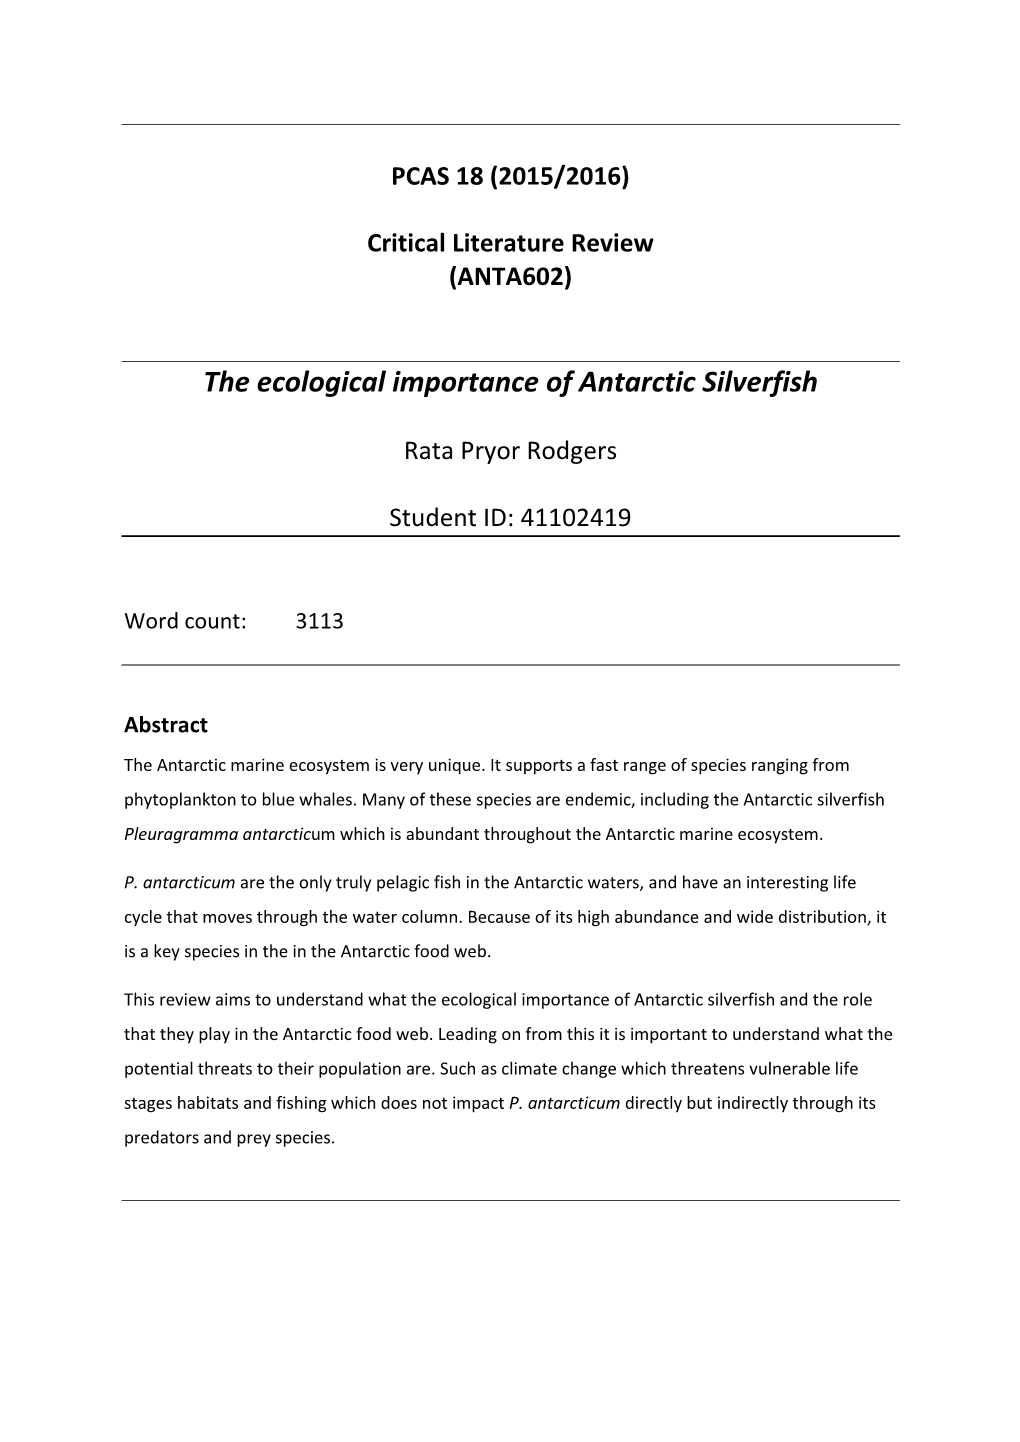 The Ecological Importance of Antarctic Silverfish